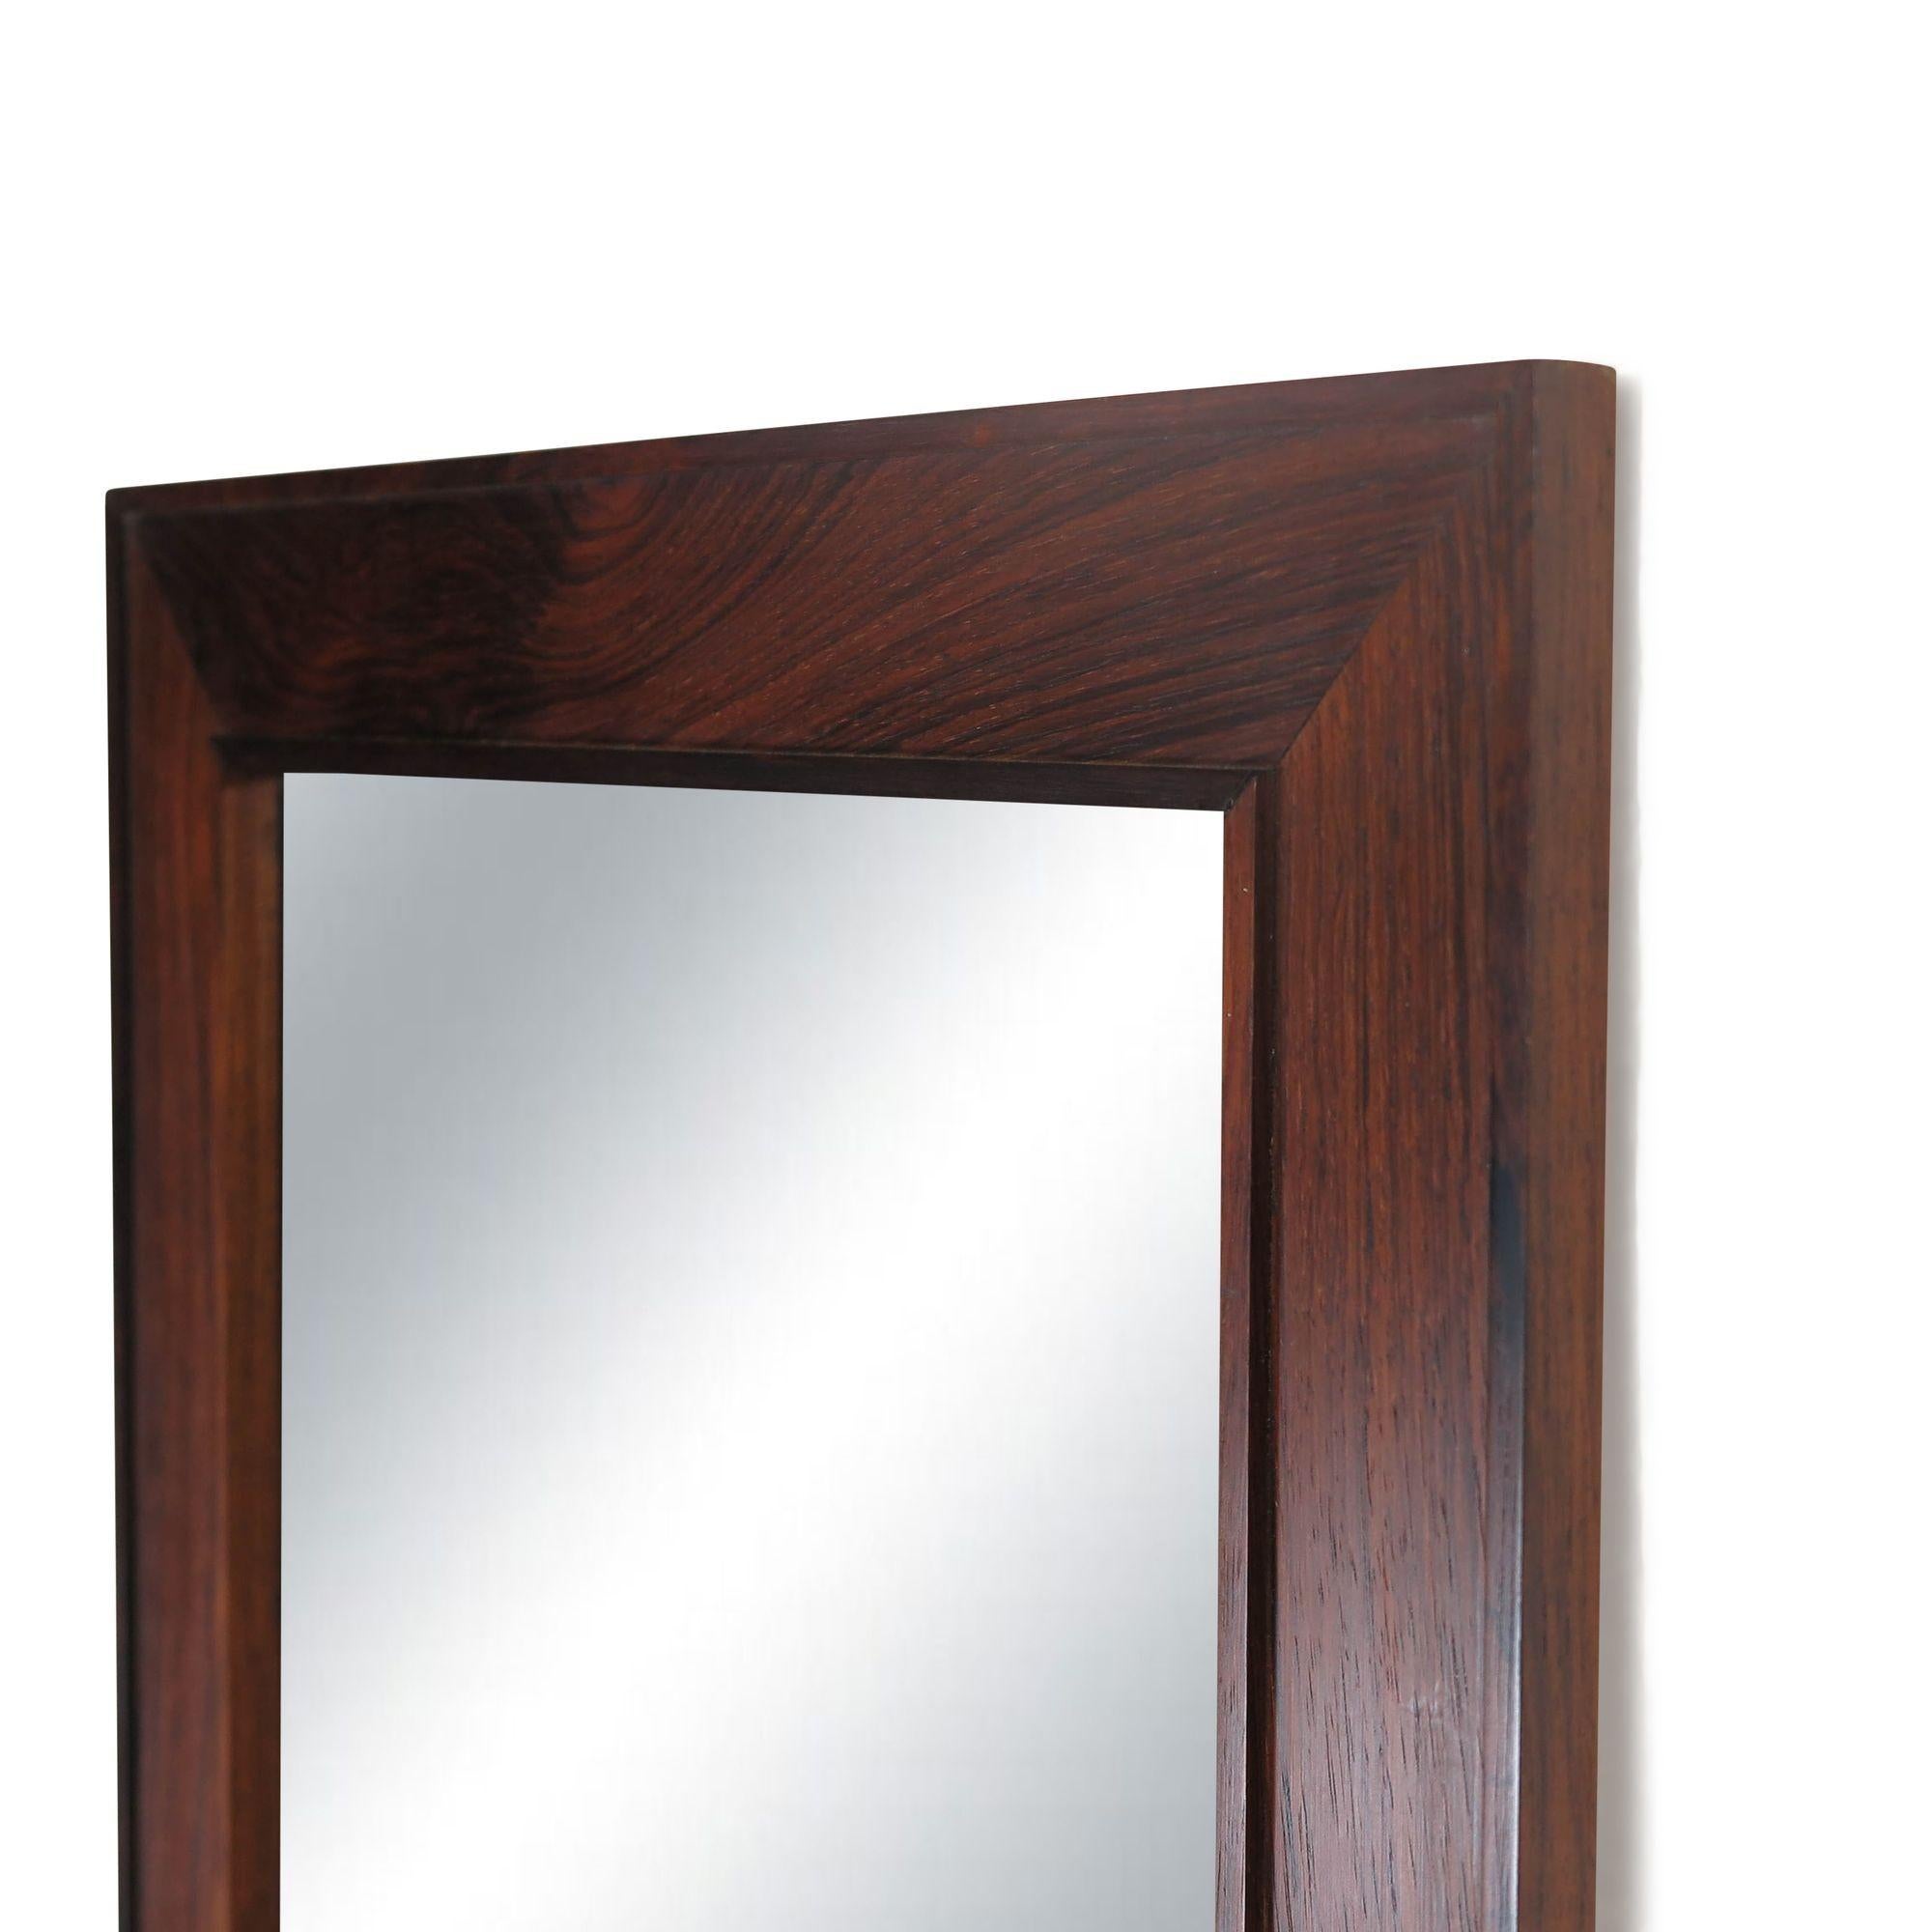 Mid-century Jansen Spejle Danish Rosewood Mirror In Excellent Condition For Sale In Oakland, CA